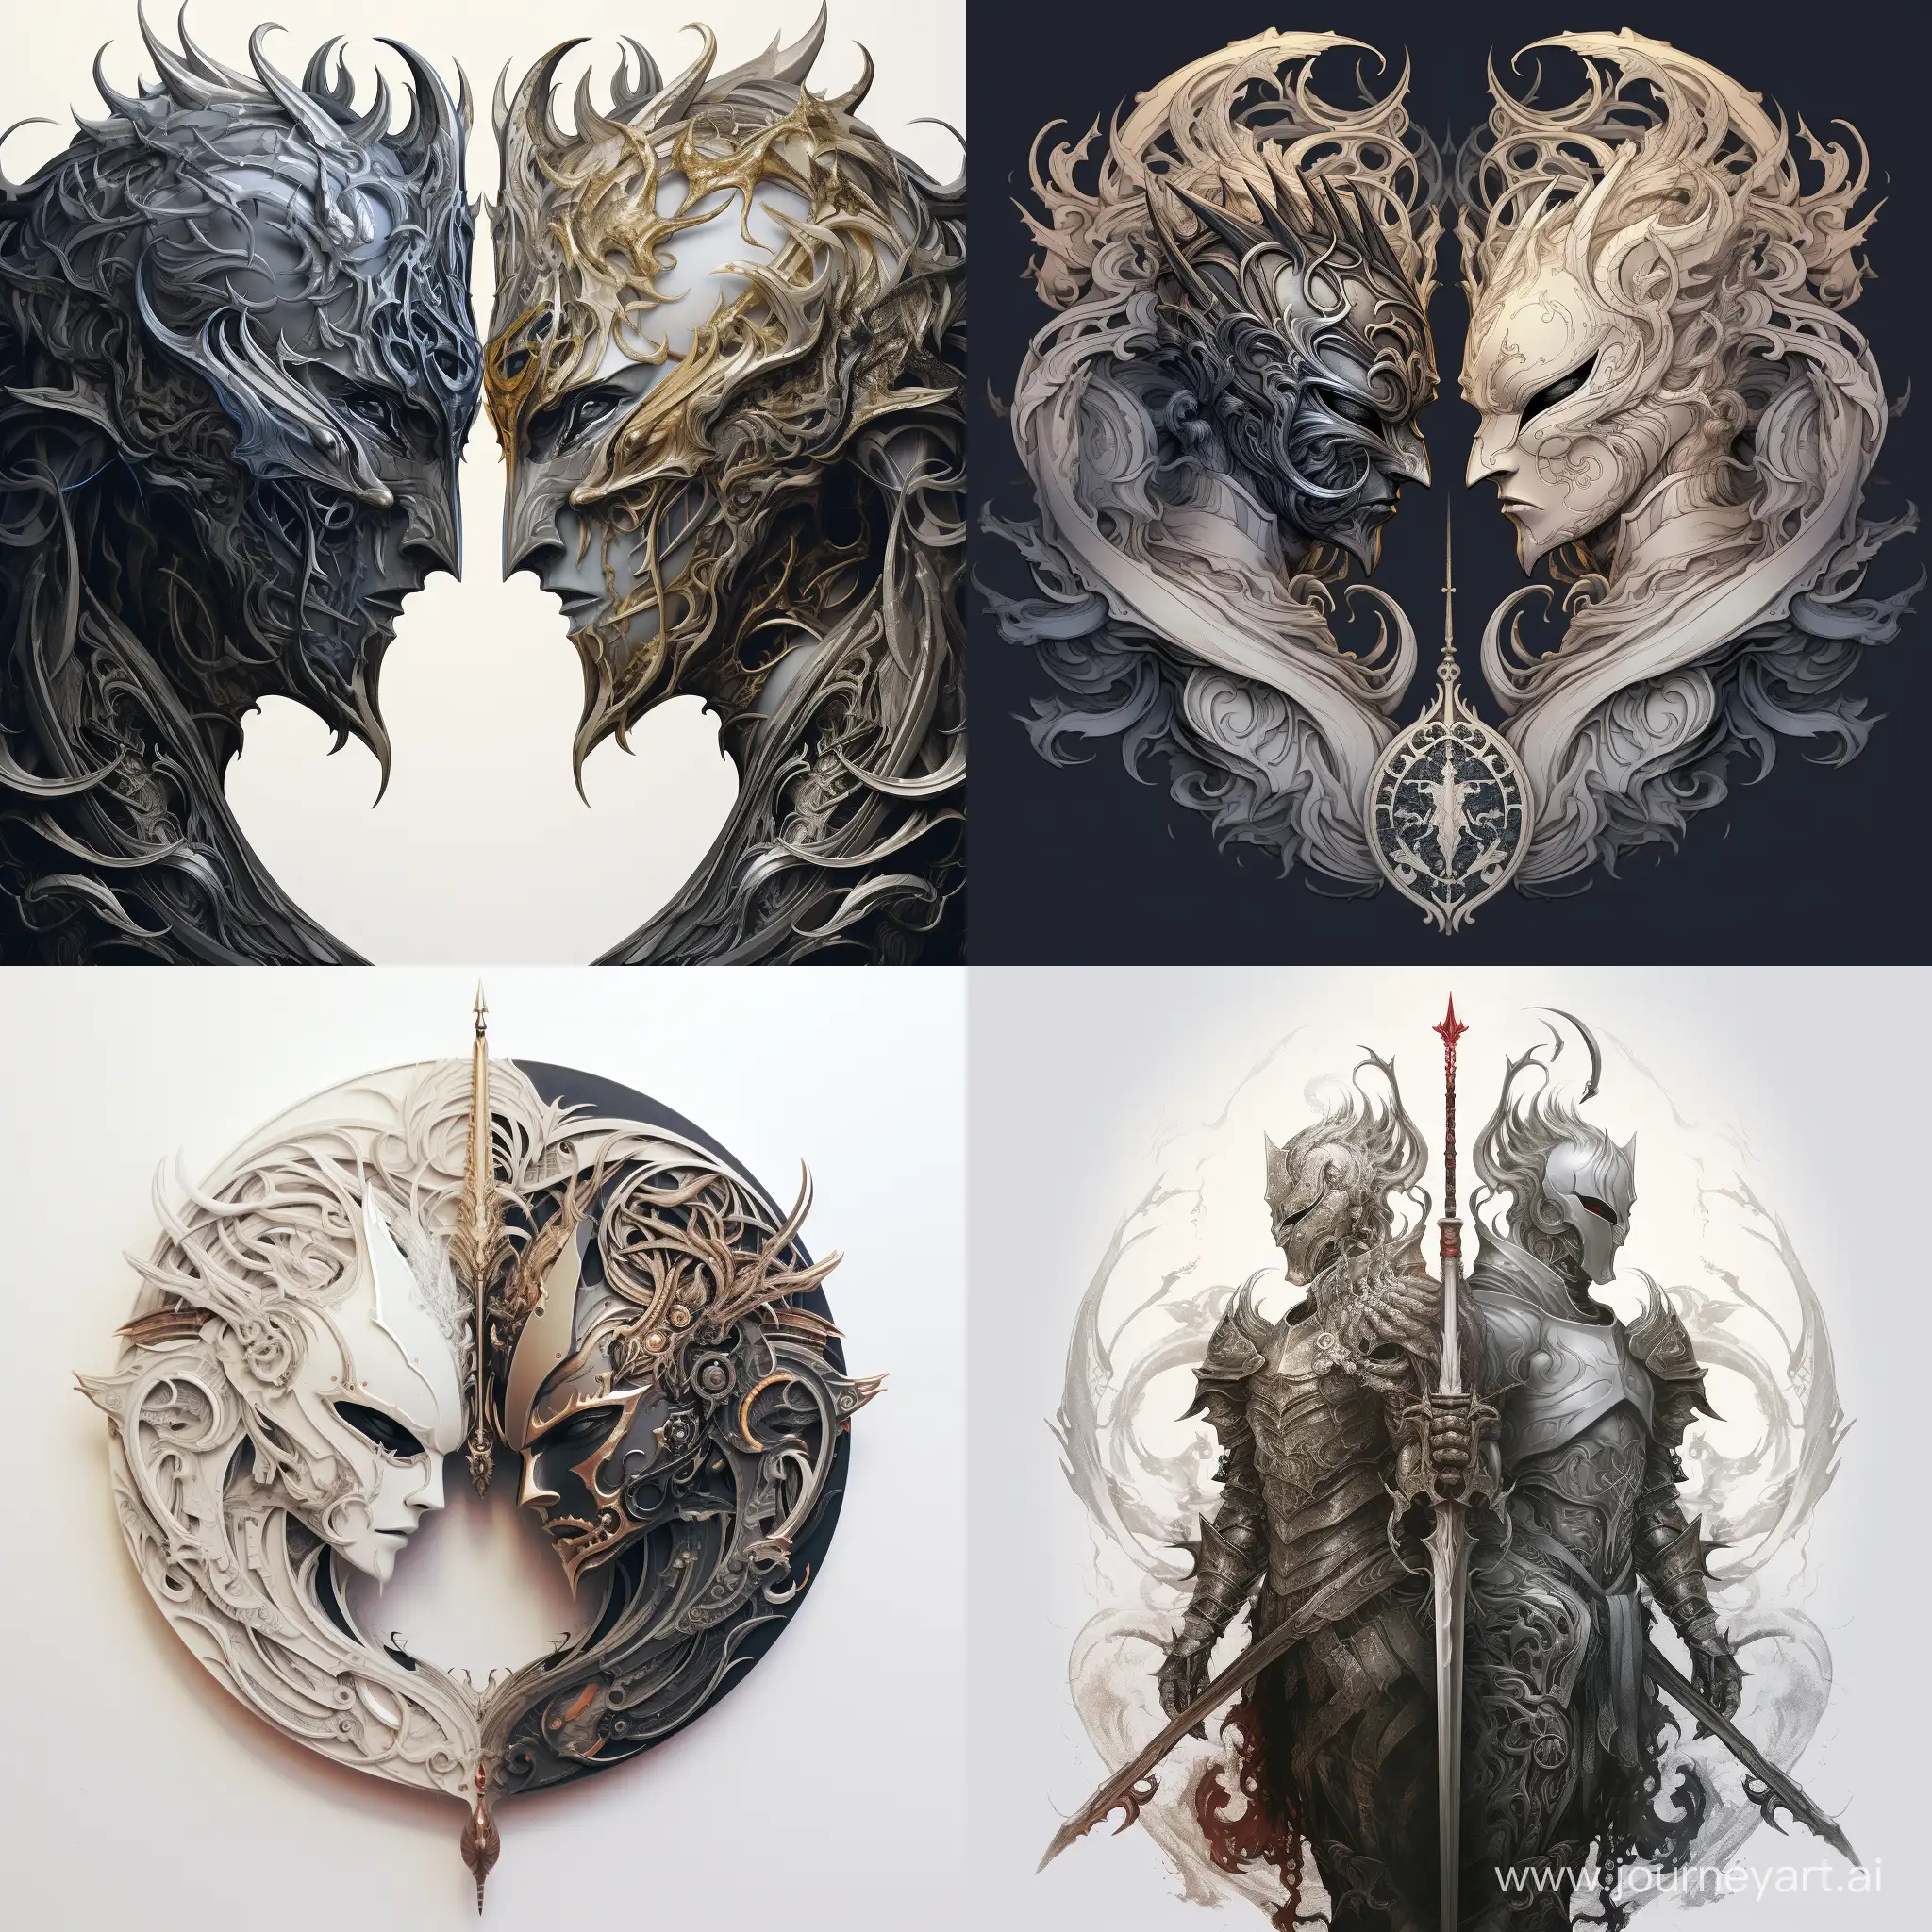 Yin-Yang-White-and-Black-Knights-in-Detailed-HighResolution-Art